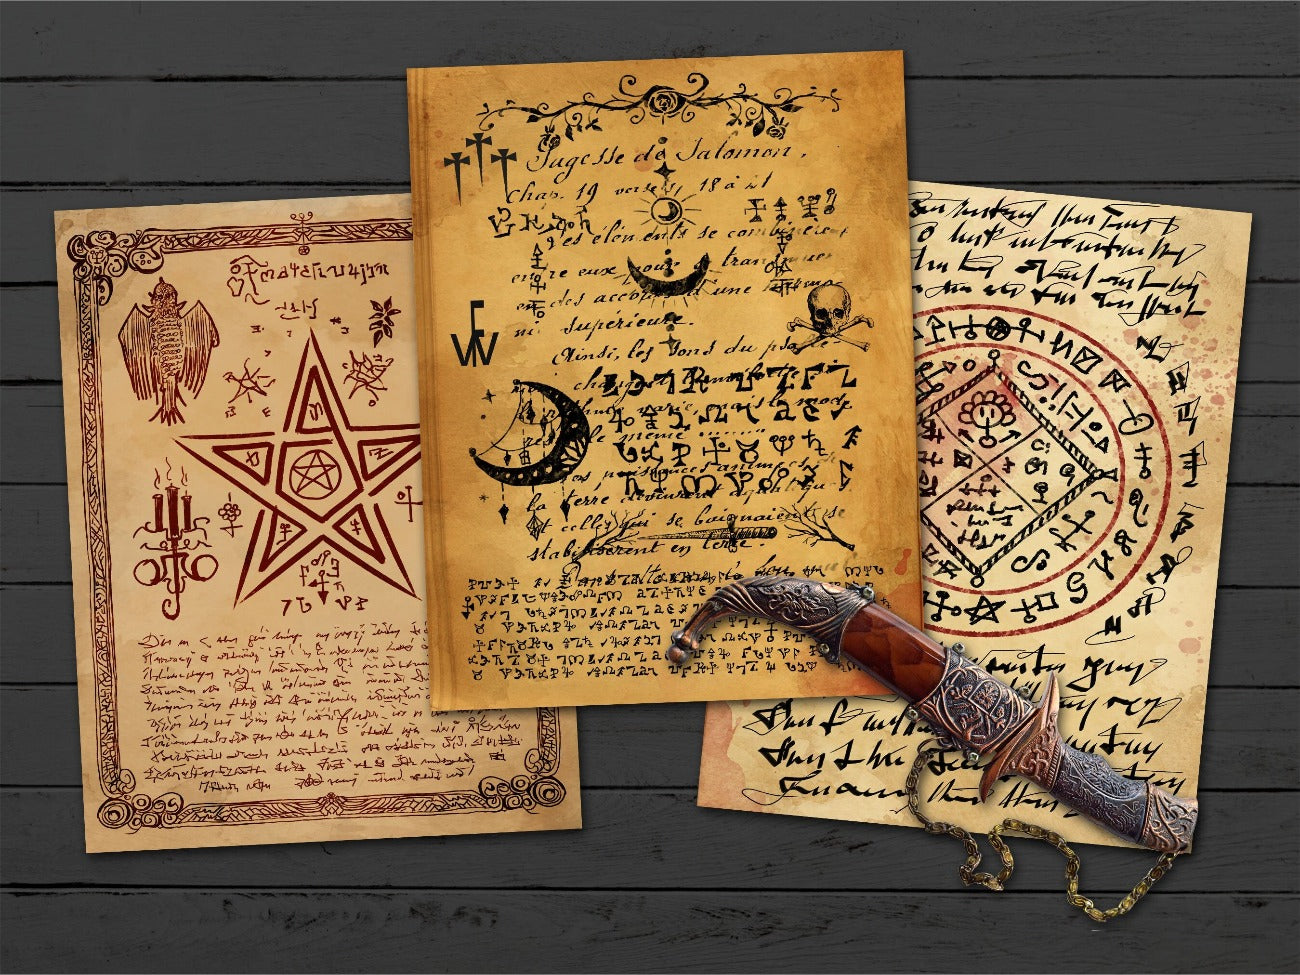 MYSTIC OCCULT, Digital Gothic Pages, Esoteric Supernatural, With Mystical Symbols, Witchy scrapbook, Magic Spellbook, Junk Journal Papers - Morgana Magick Spell